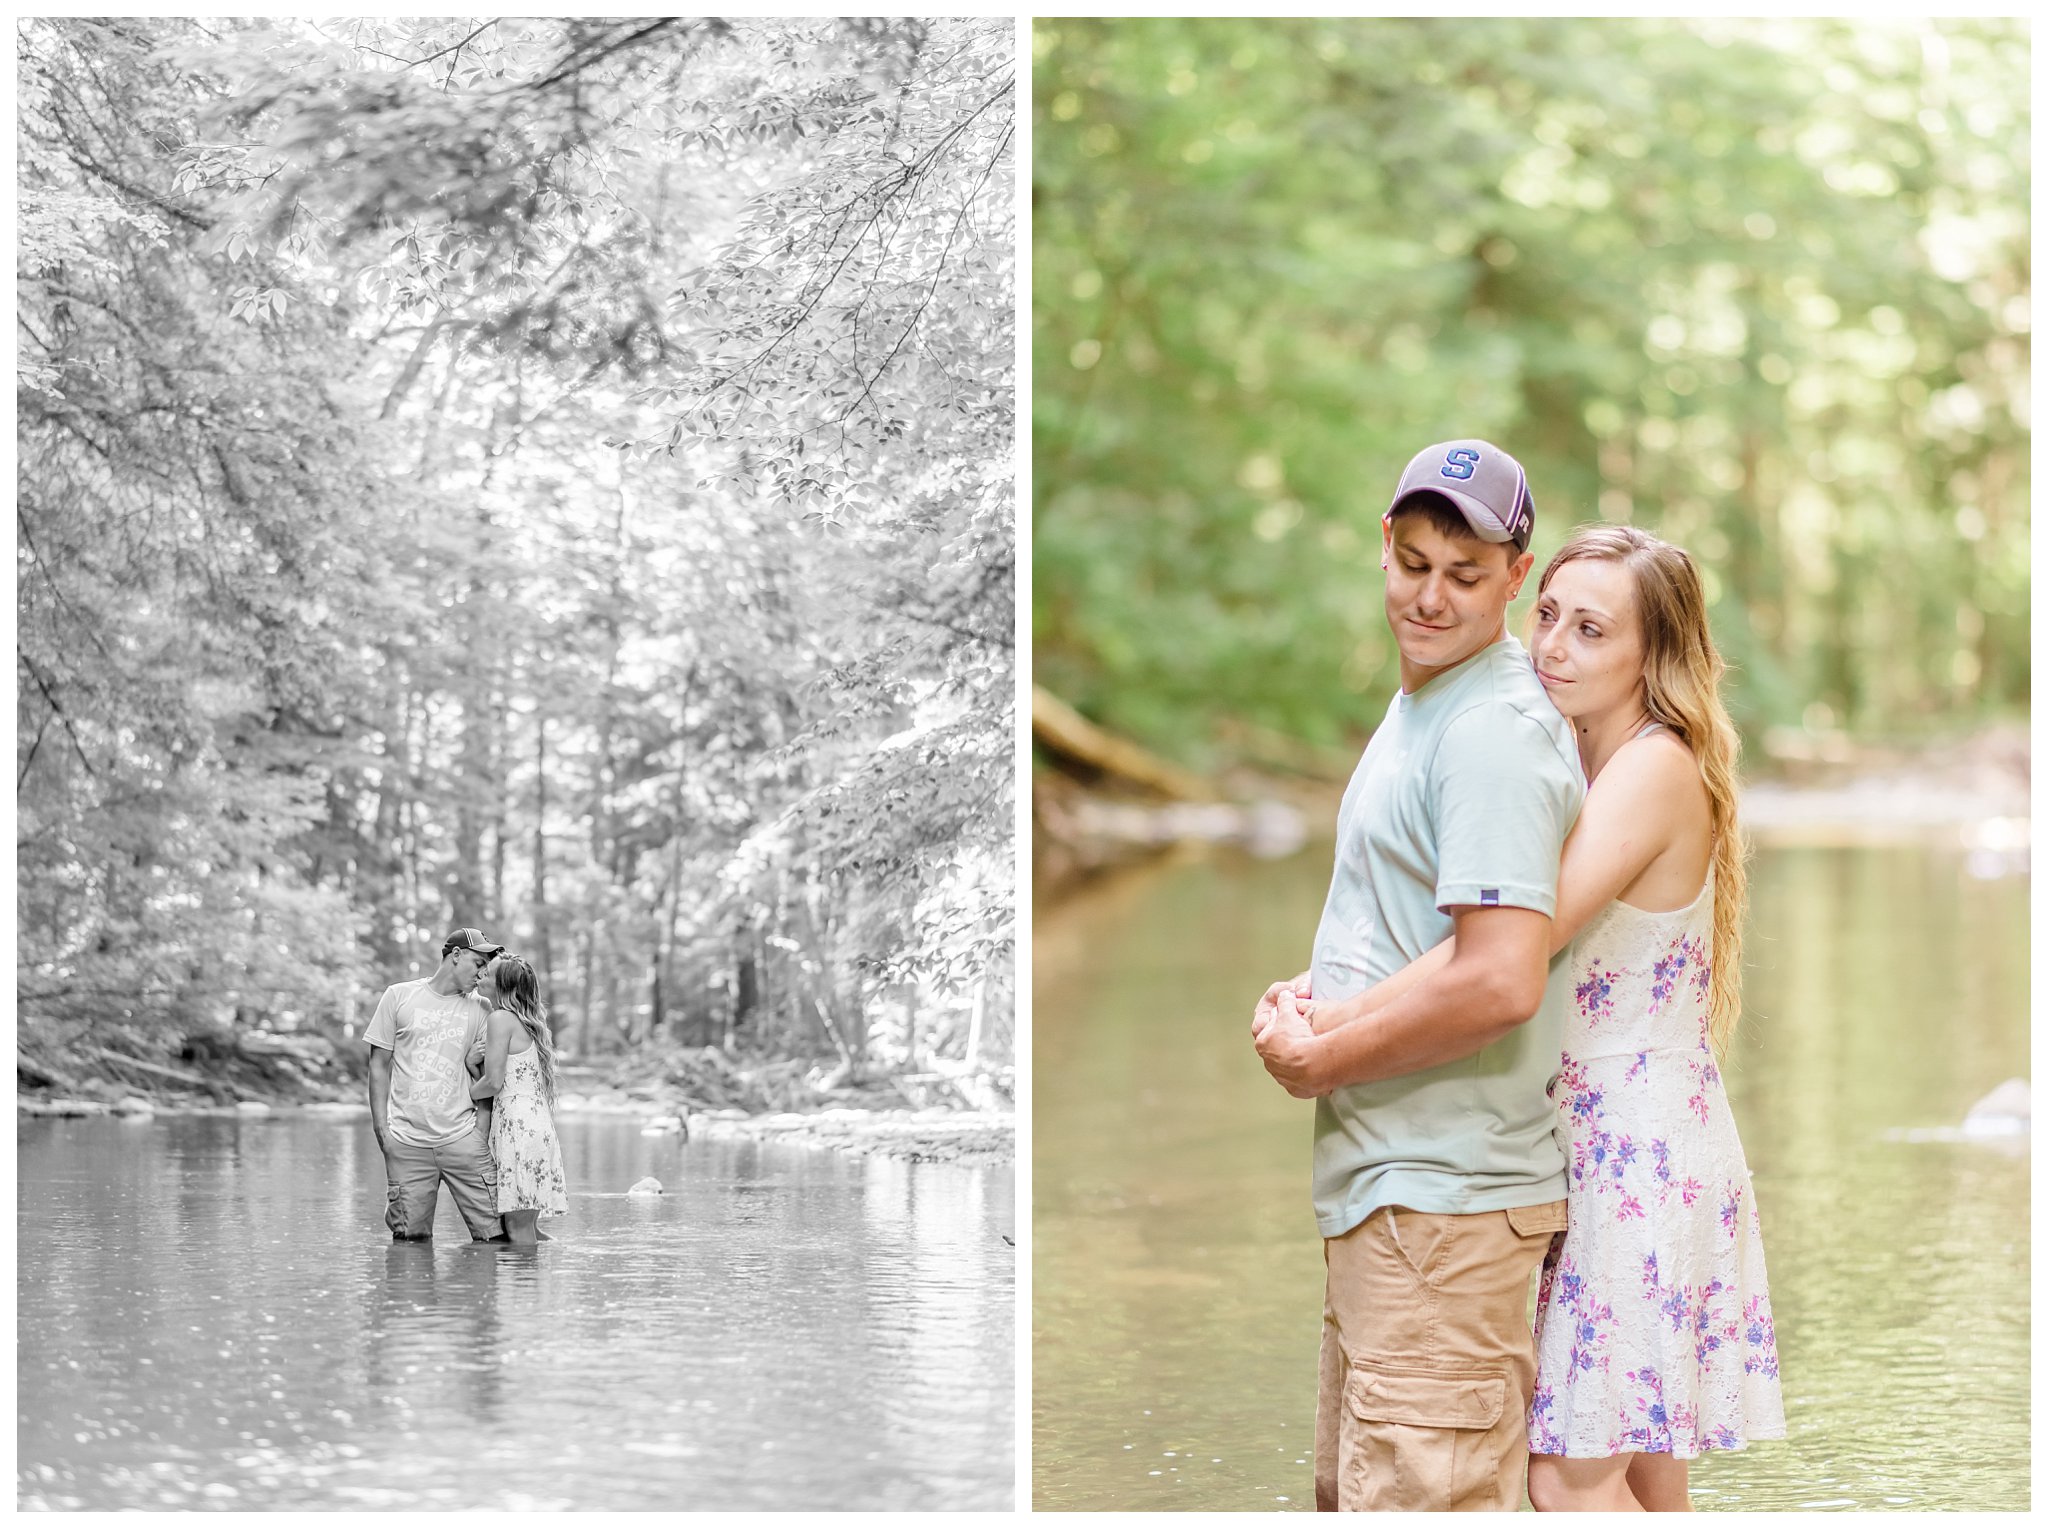 Joanna Young Photography Elizabeth and Cody Engagement Session_0012.jpg